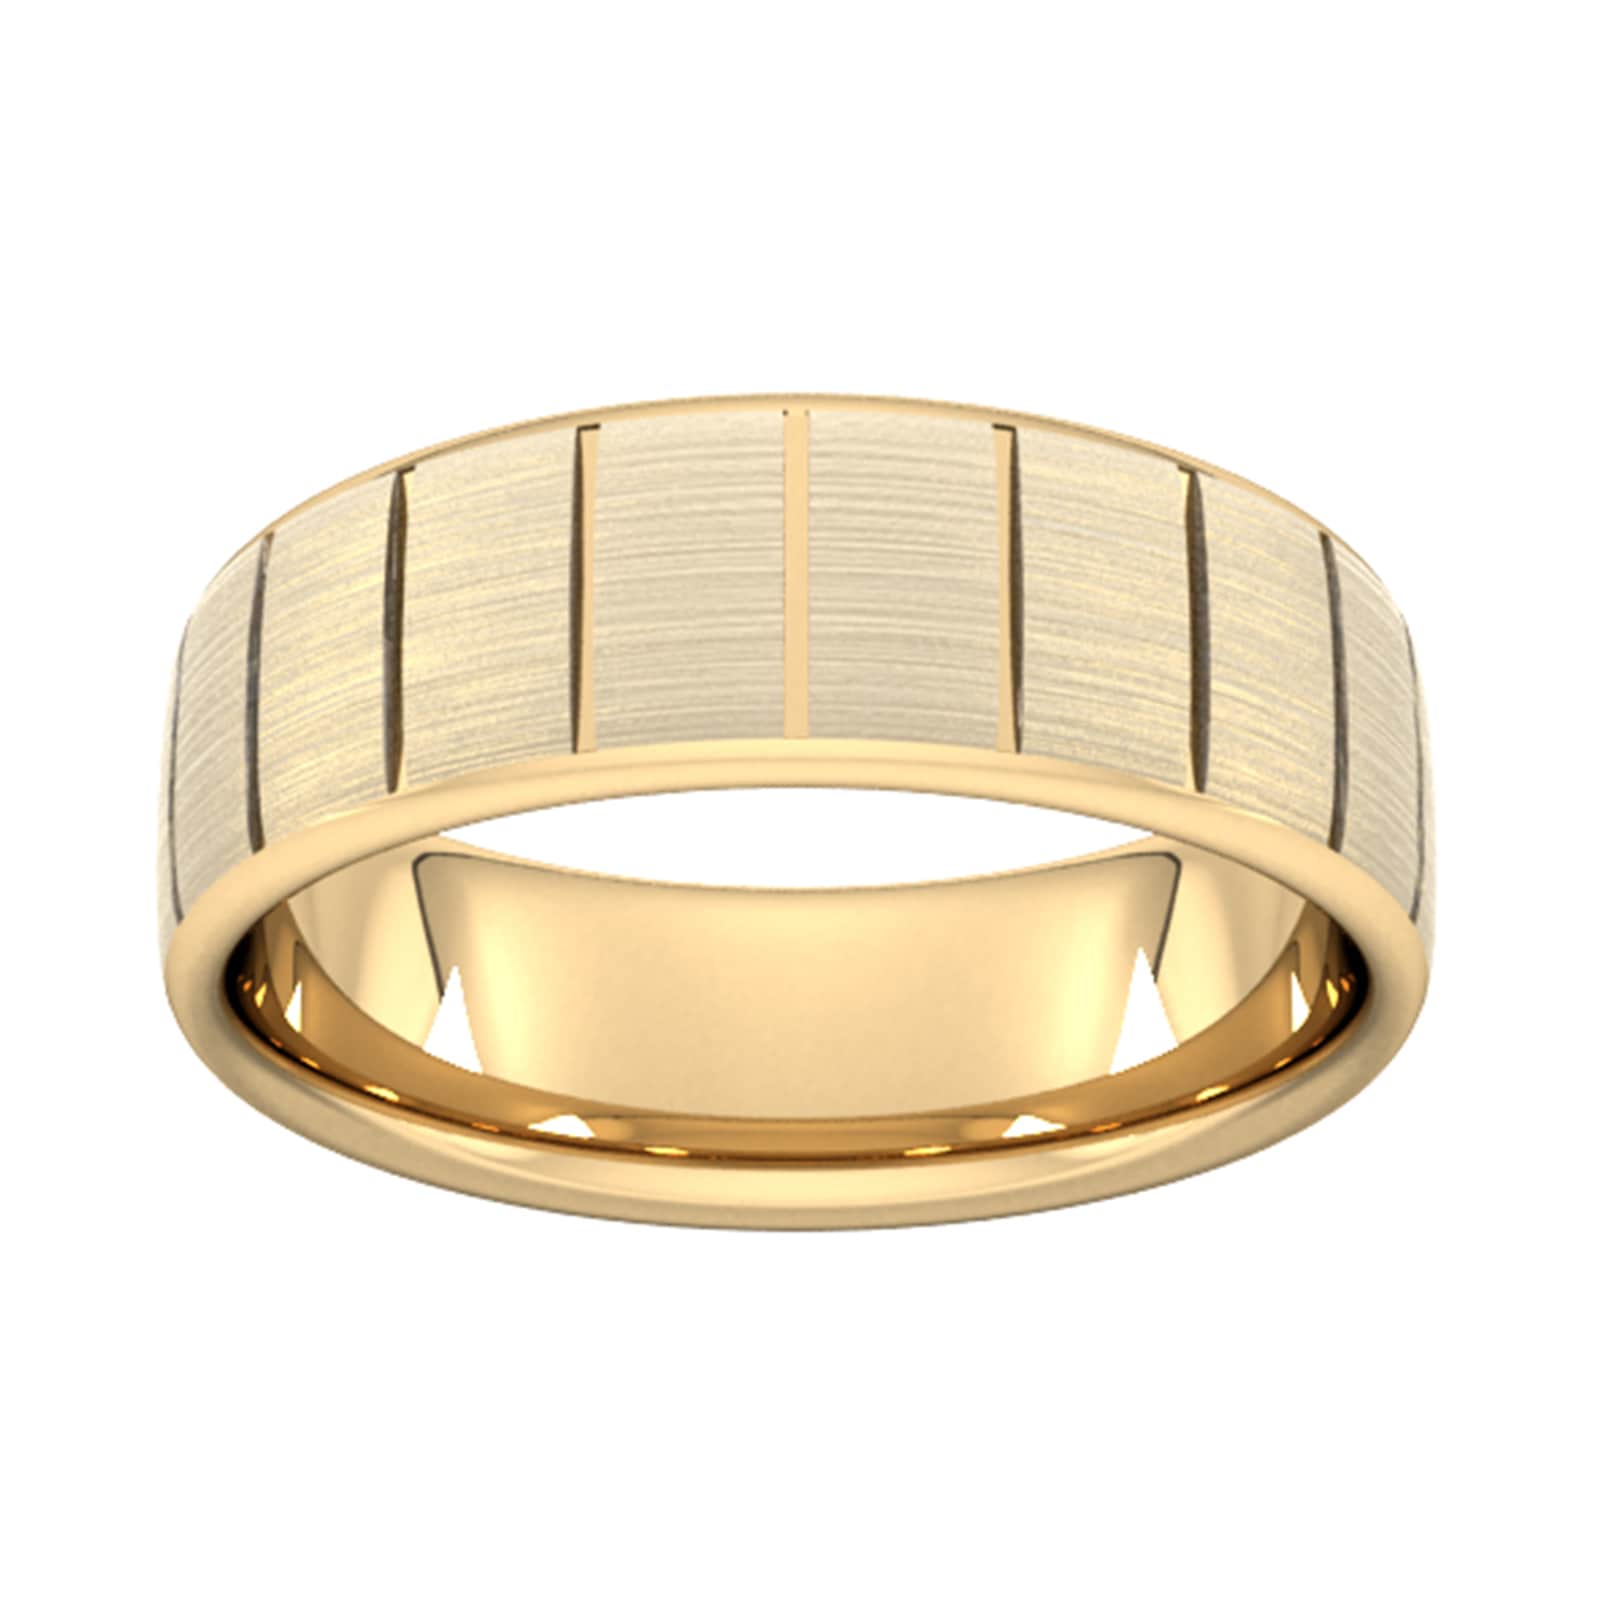 7mm Traditional Court Standard Vertical Lines Wedding Ring In 18 Carat Yellow Gold - Ring Size J